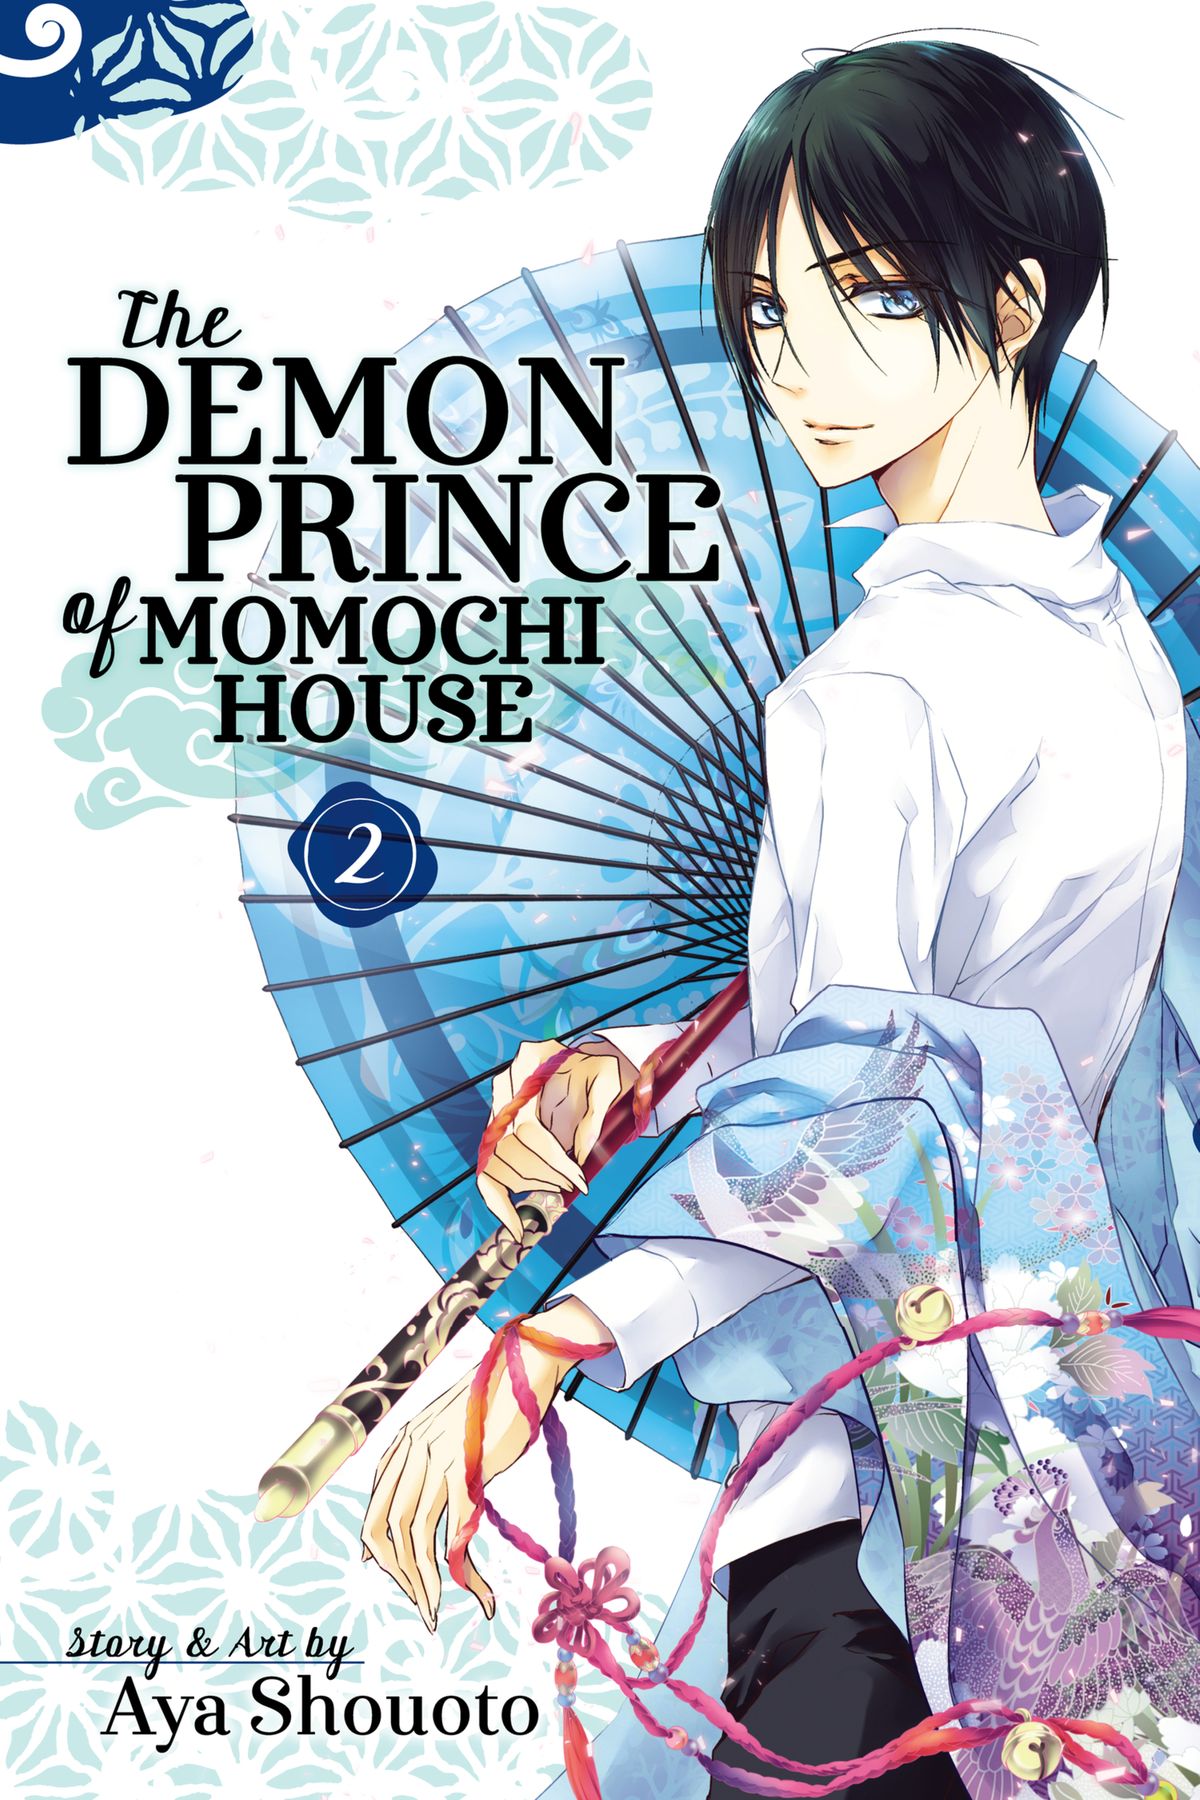 The Demon Prince of Momochi House - Volume 2